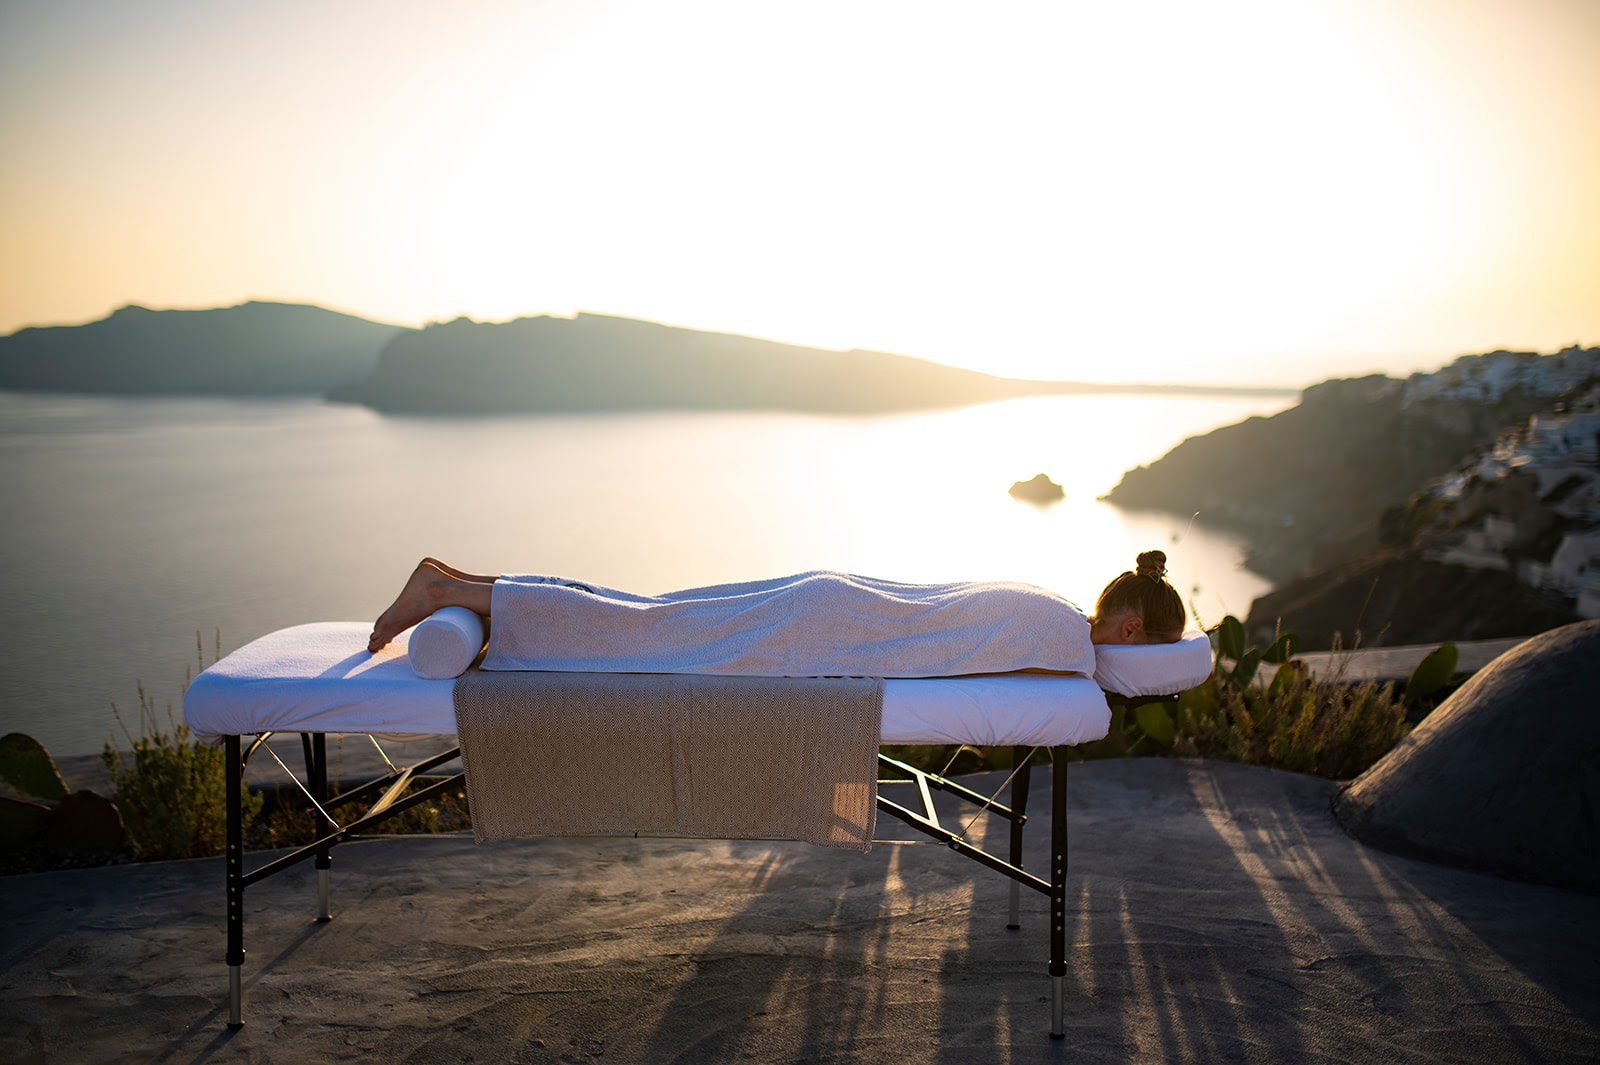 Indulge in our exclusive Signature Treatments in Santorini, tailored to rejuvenate mind and body with unique therapies.